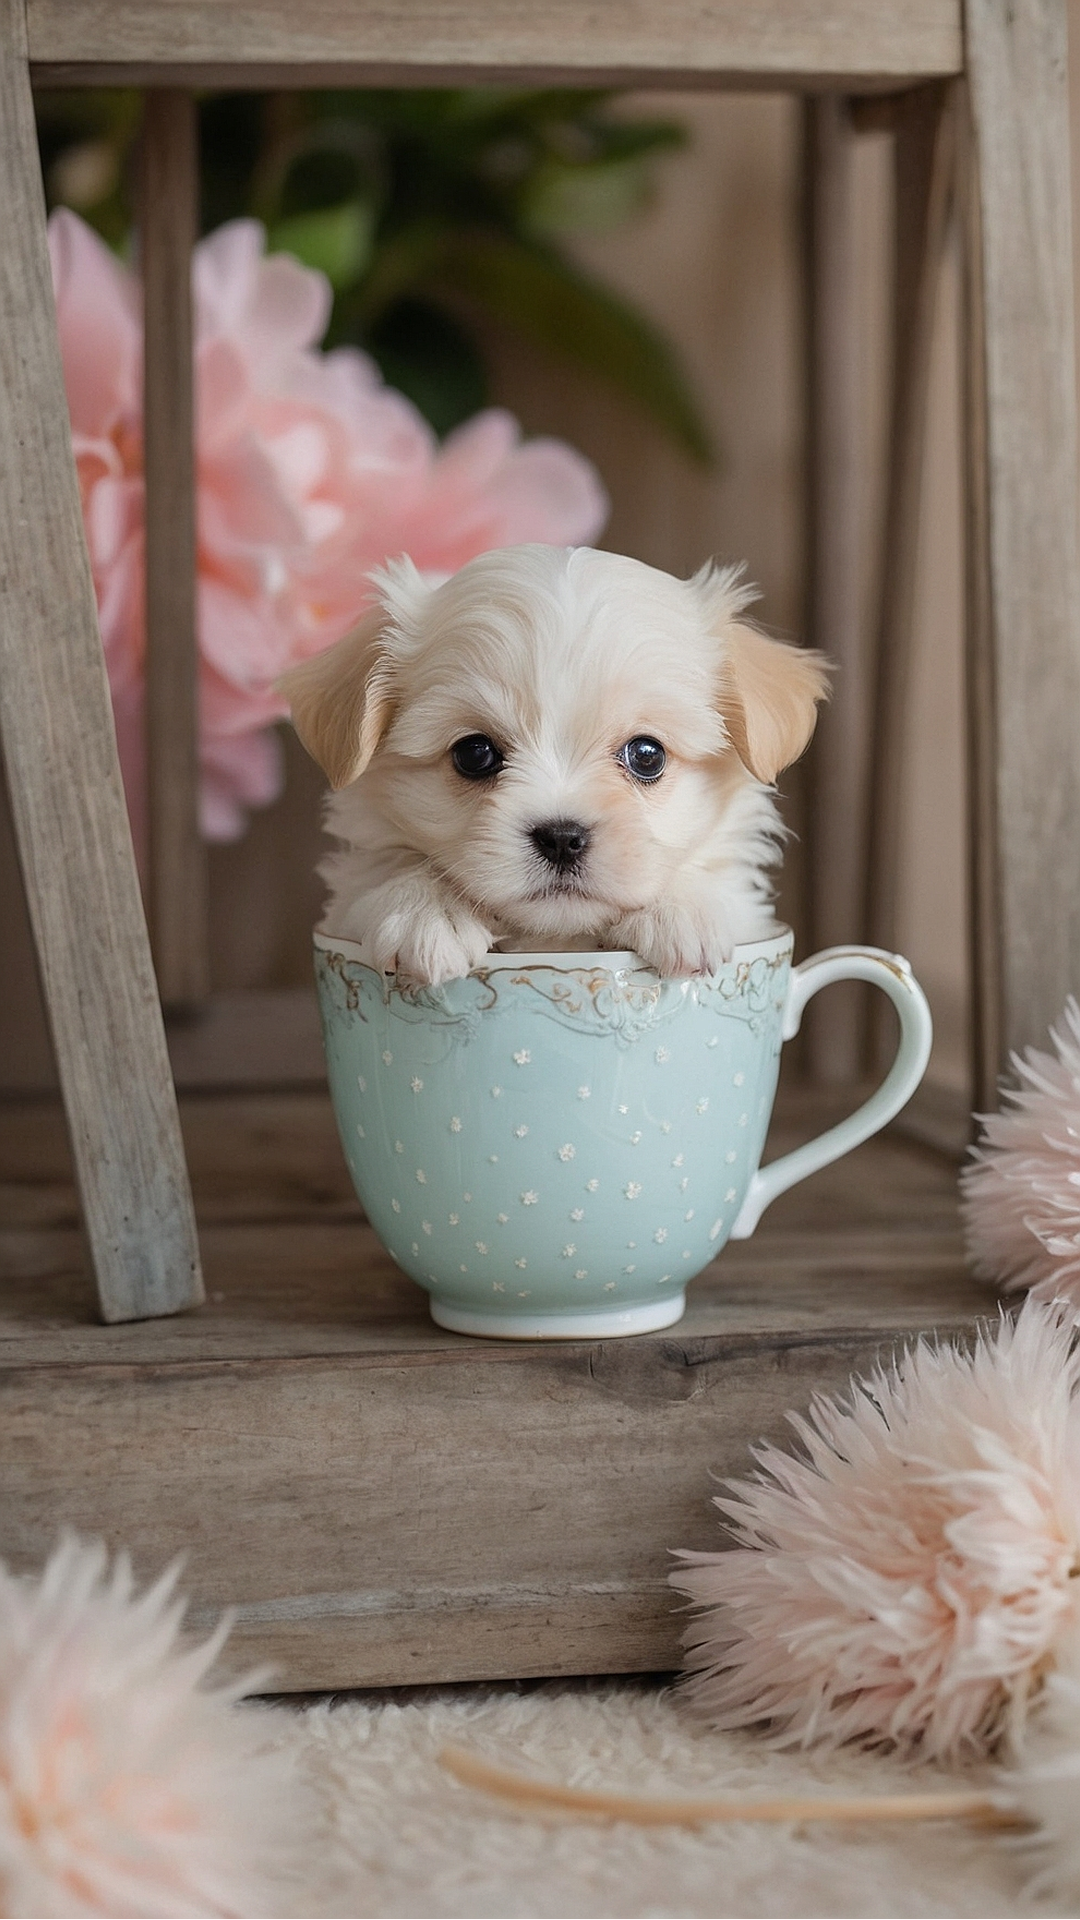 Sweet Snuggles and Soft Fur: Teacup Puppies Collection